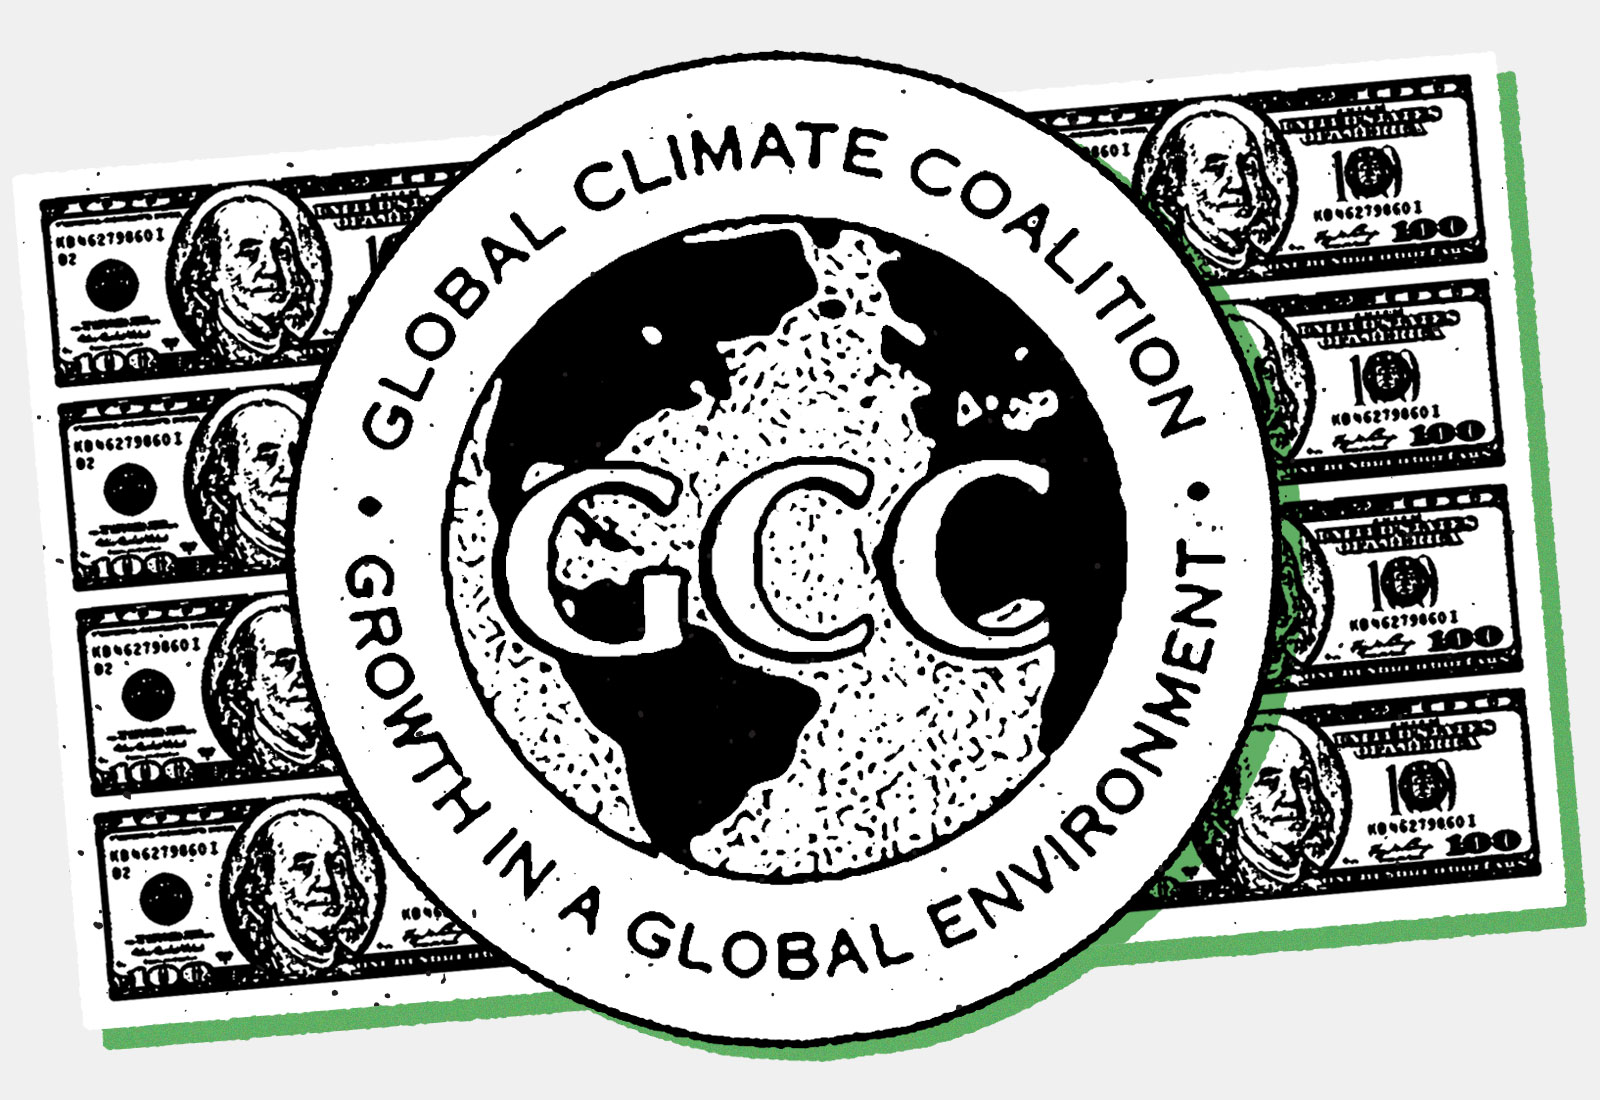 Global Climate Coalition circular logo with drawing of Earth and letters 